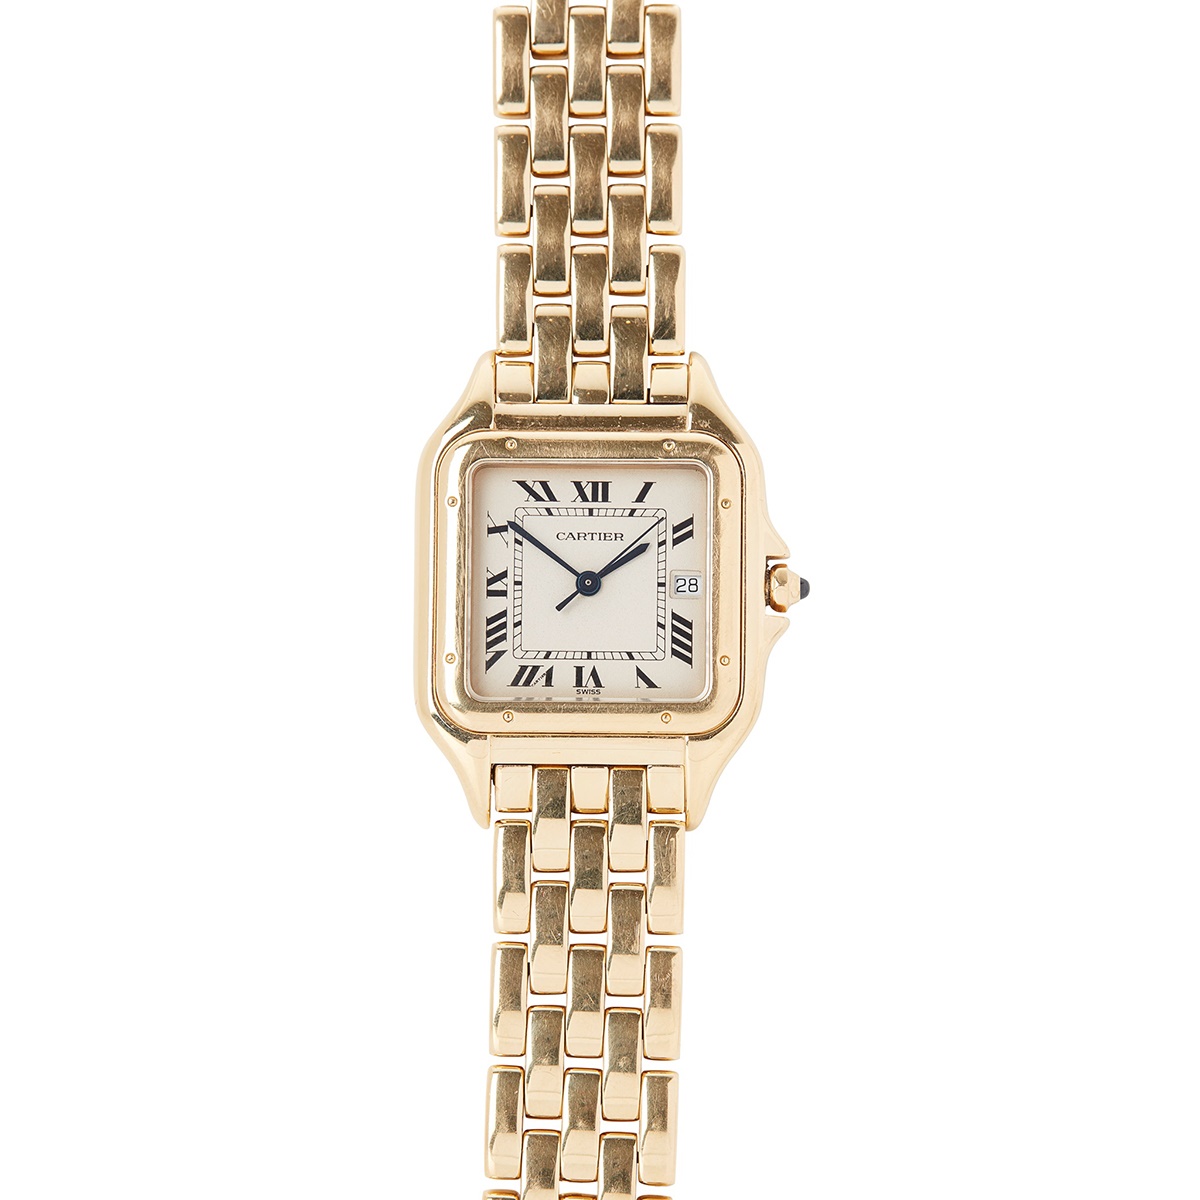 A MID SIZE 18CT GOLD WRISTWATCH, CARTIER Panthère model, square buff dial, Roman numerals in black, date aperture at 3, inner seconds track in black, blued steel sword hands, centre seconds hand in black, screw motif bezel, sapphire set crown, with Cartier Quartz 18K SWISS MADE 887968 003461 to the case back, Cartier integrated polished gold brick link bracelet strap, Cartier signed concealed clasp, no box or papers, with travel/service pouch | Case width: 29mm including crown guards | £3,000 - £5,000 + fees